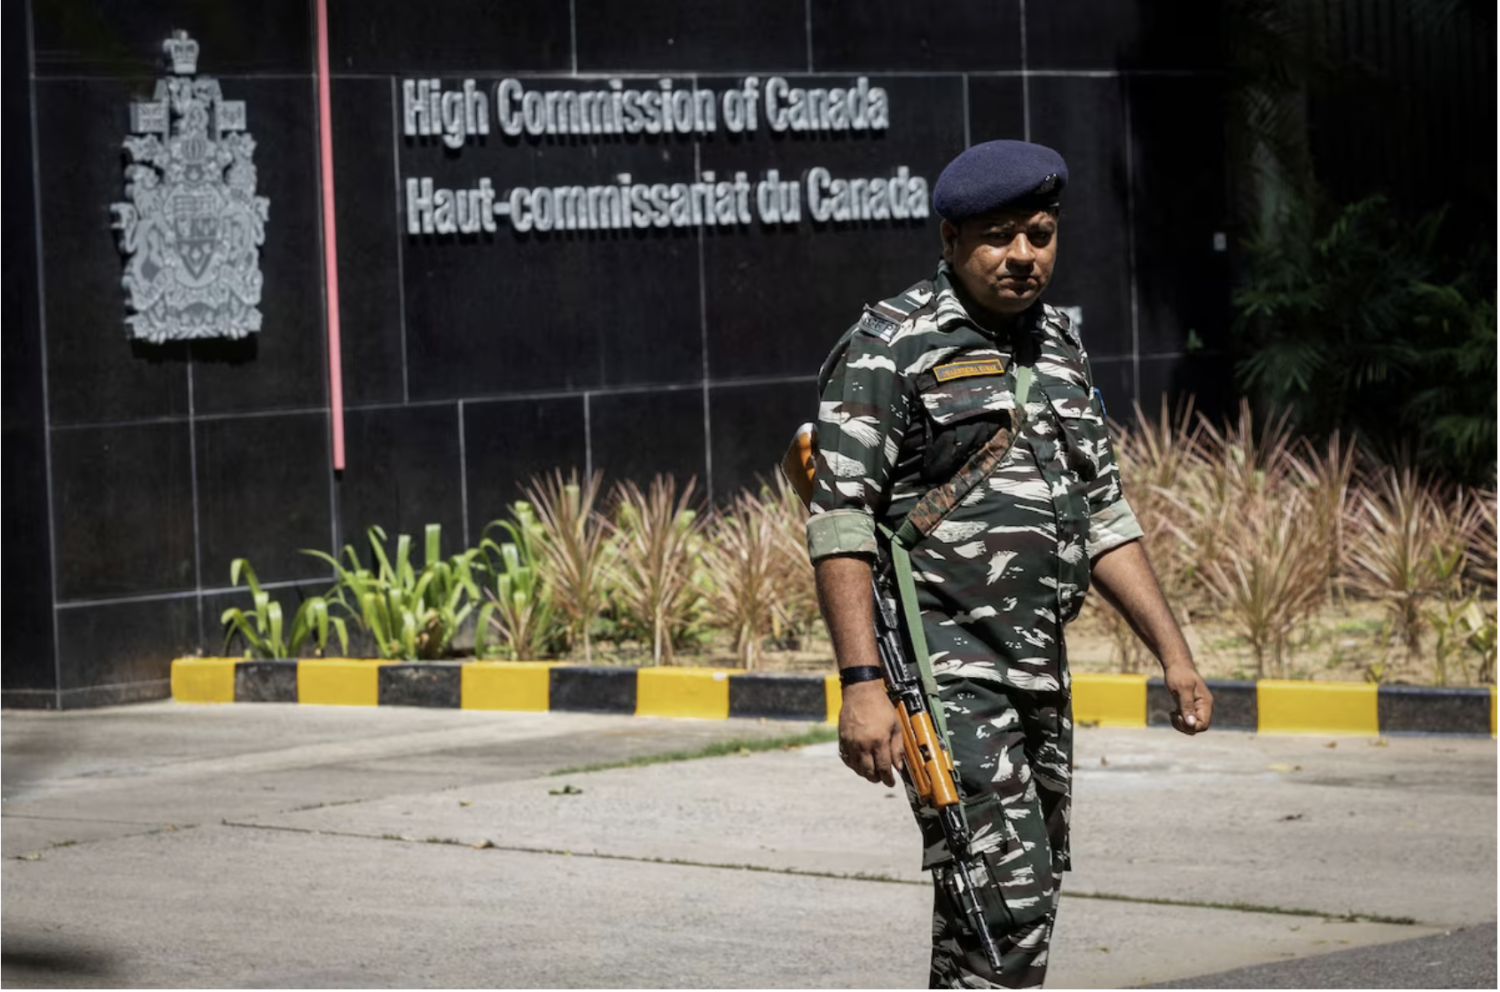 A security guard outside the Canadian High-Commission in New Delhi on Tuesday. (Adnan Abidi/Reuters)